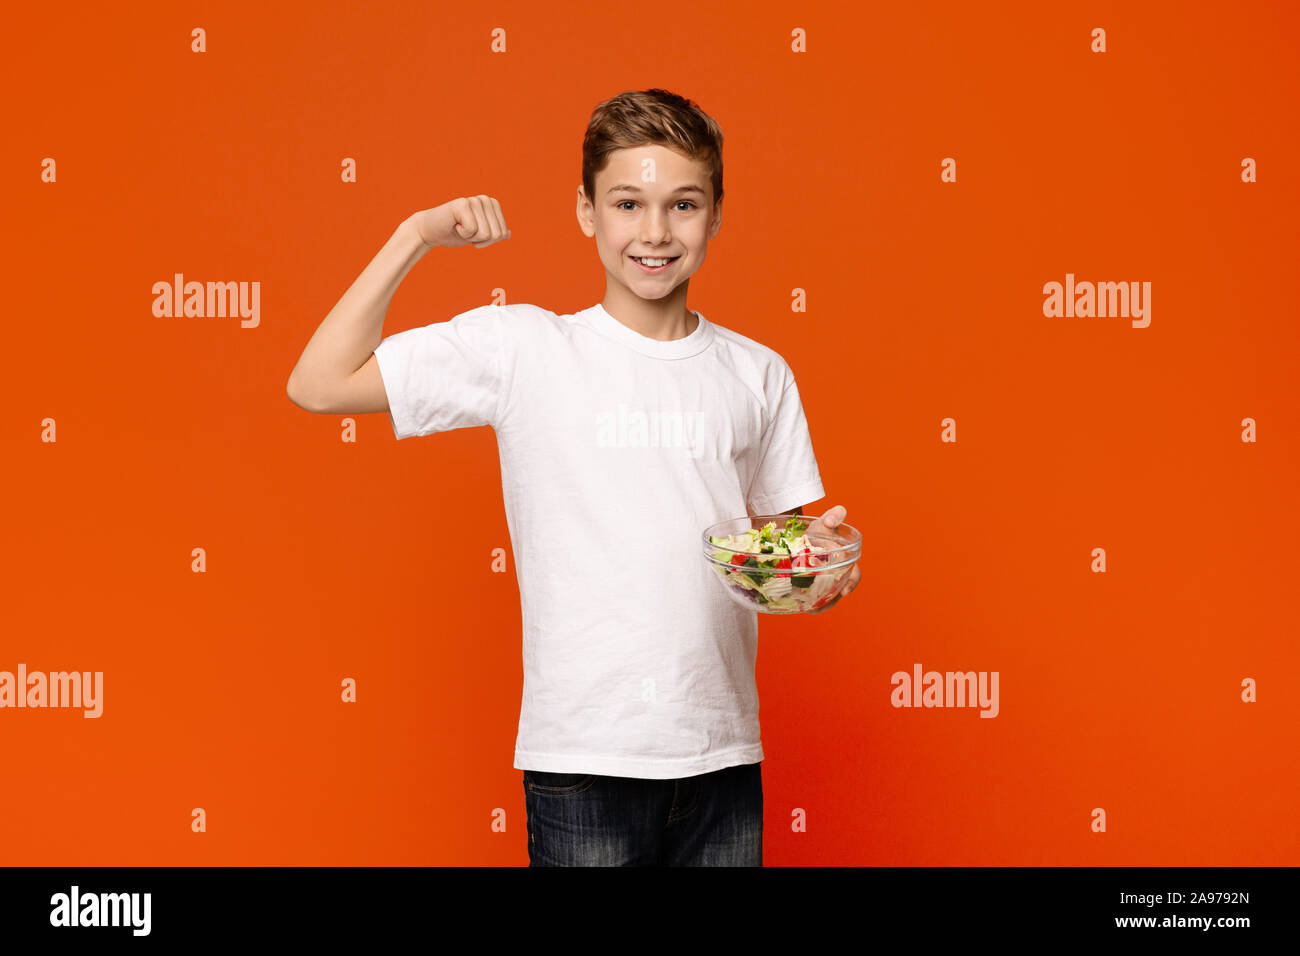 Healthy nutrition. Strong teenager with fresh vegetable salad showing his muscles, orange studio background Stock Photo